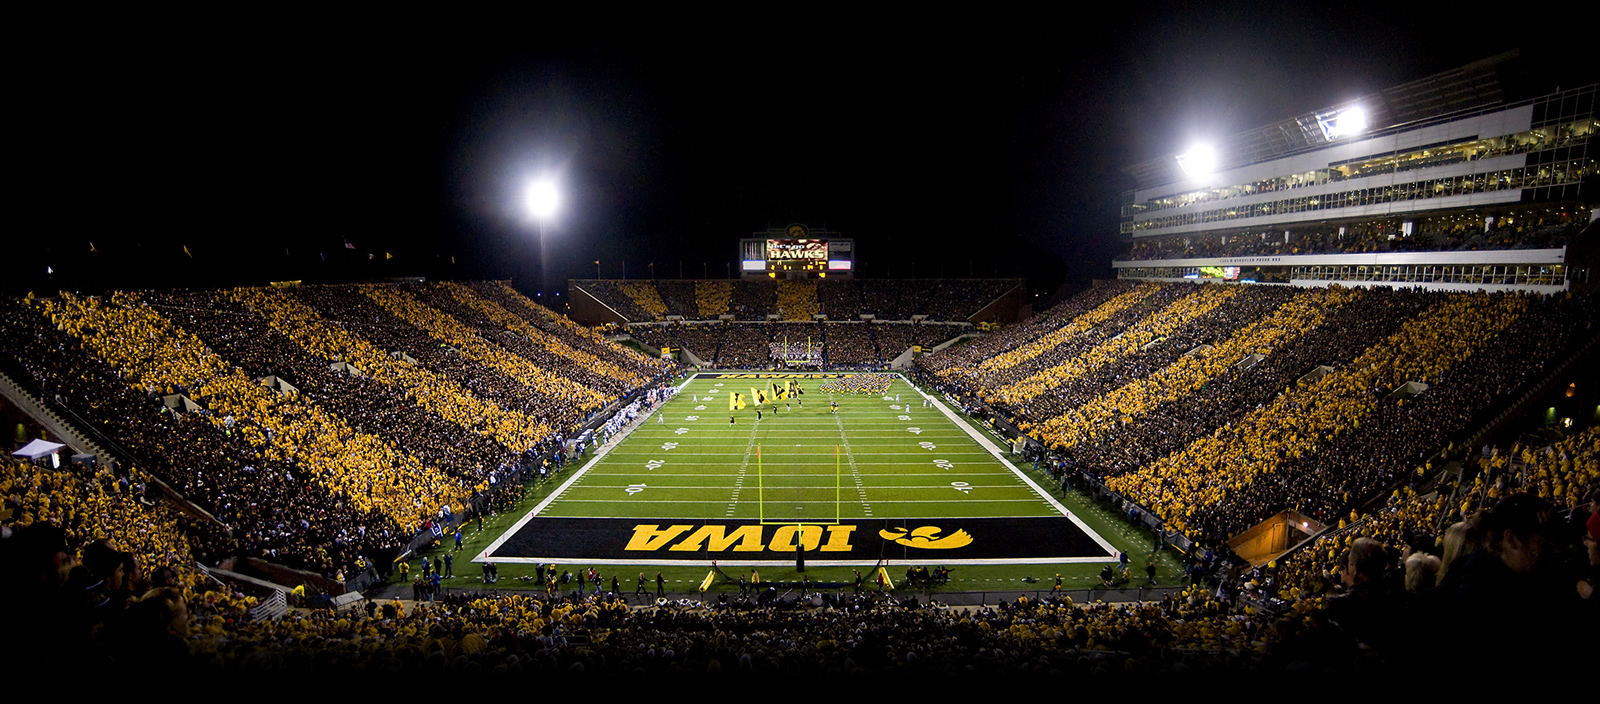 🔥 Free download Iowa Hawkeyes Football Schedule The career leader at